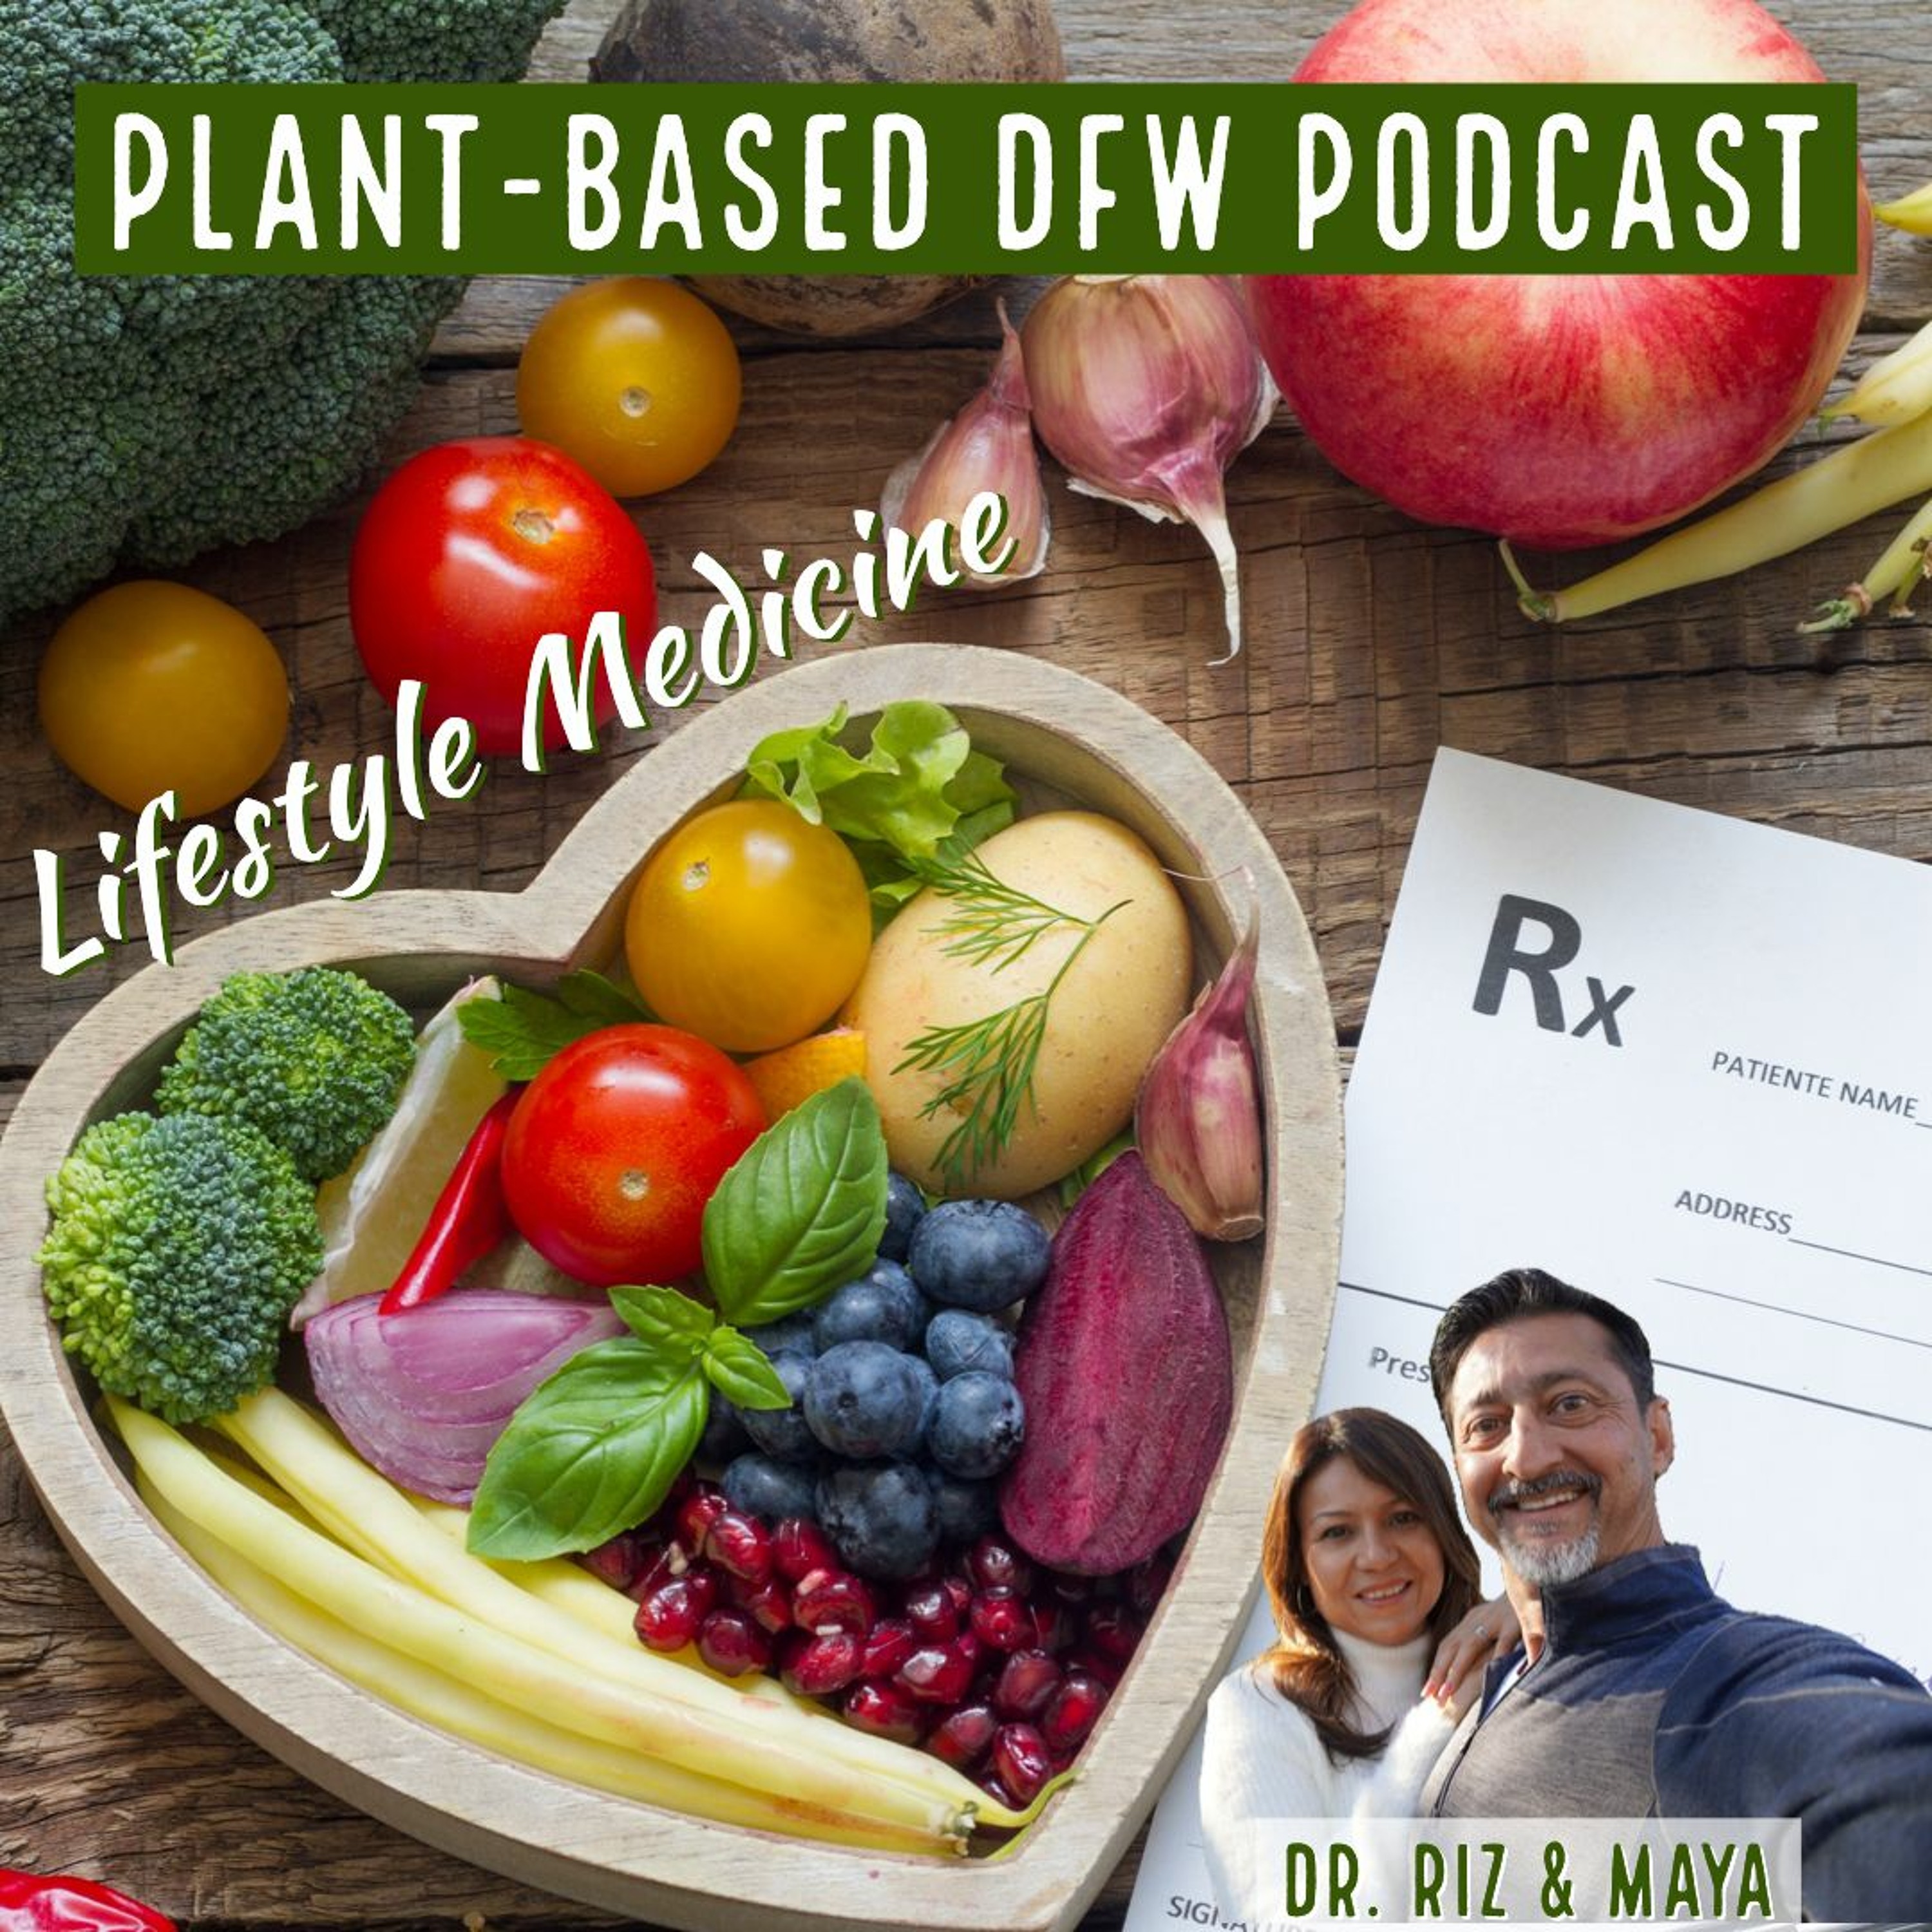 Podcast Trailer: Welcome to Plant Based DFW Image